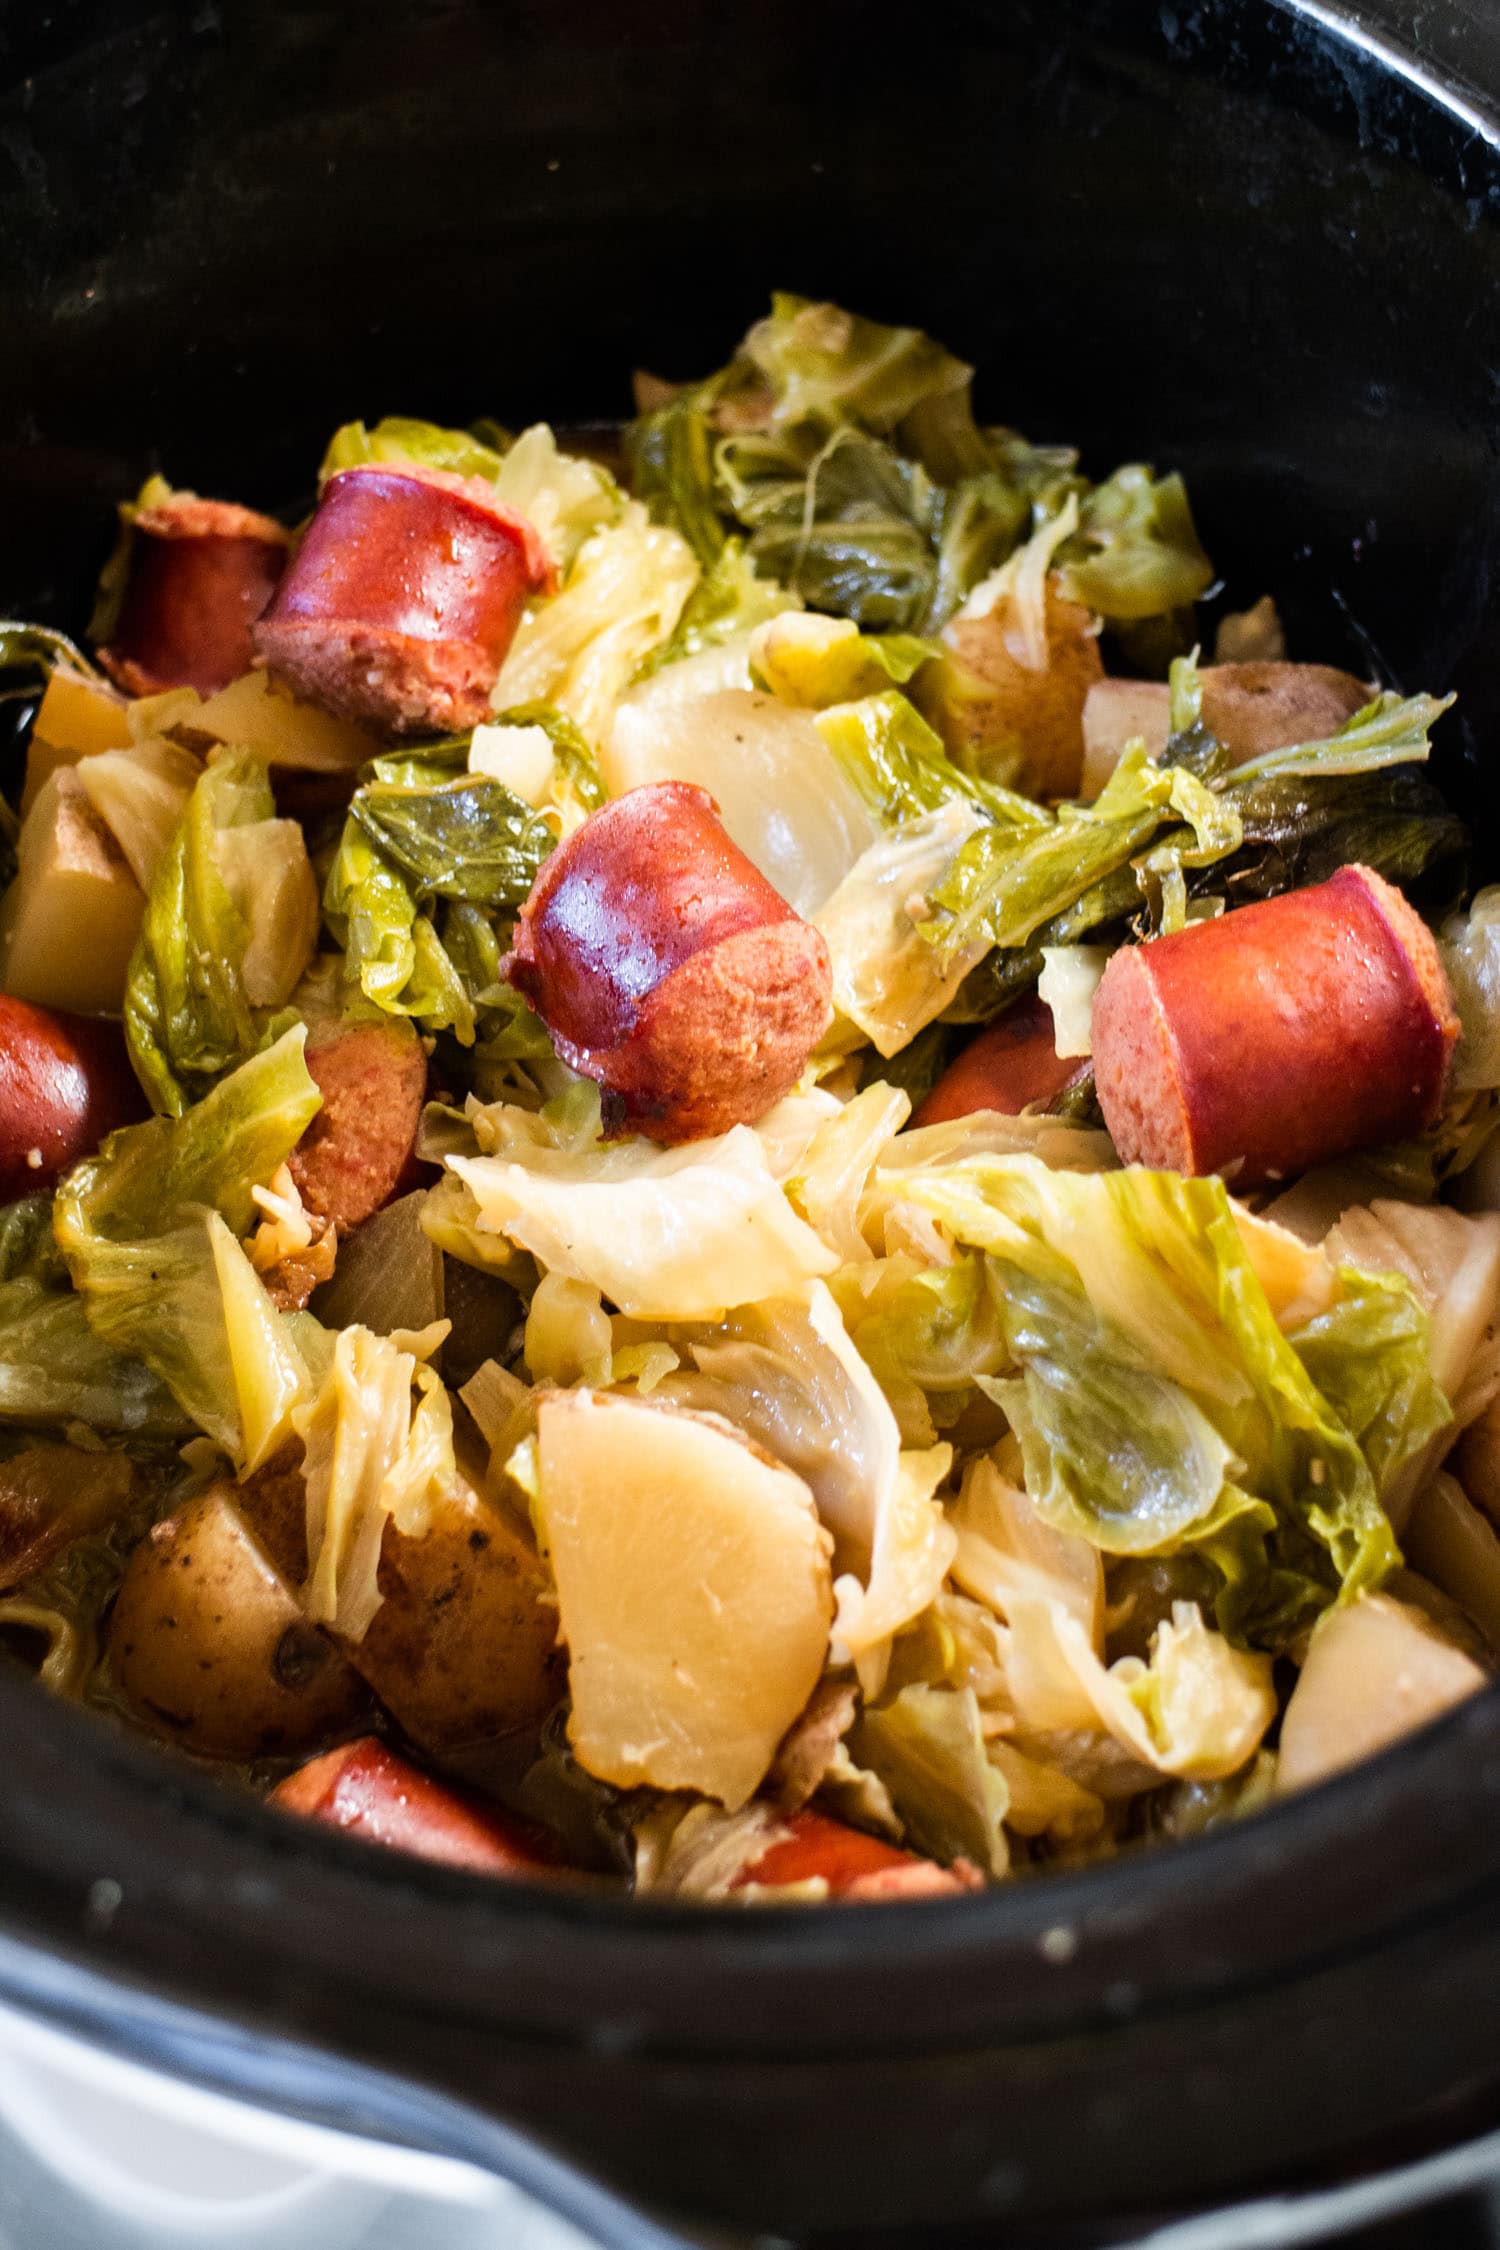 Slow Cooker Kielbasa and Cabbage Recipe - Easy Crockpot Meal!